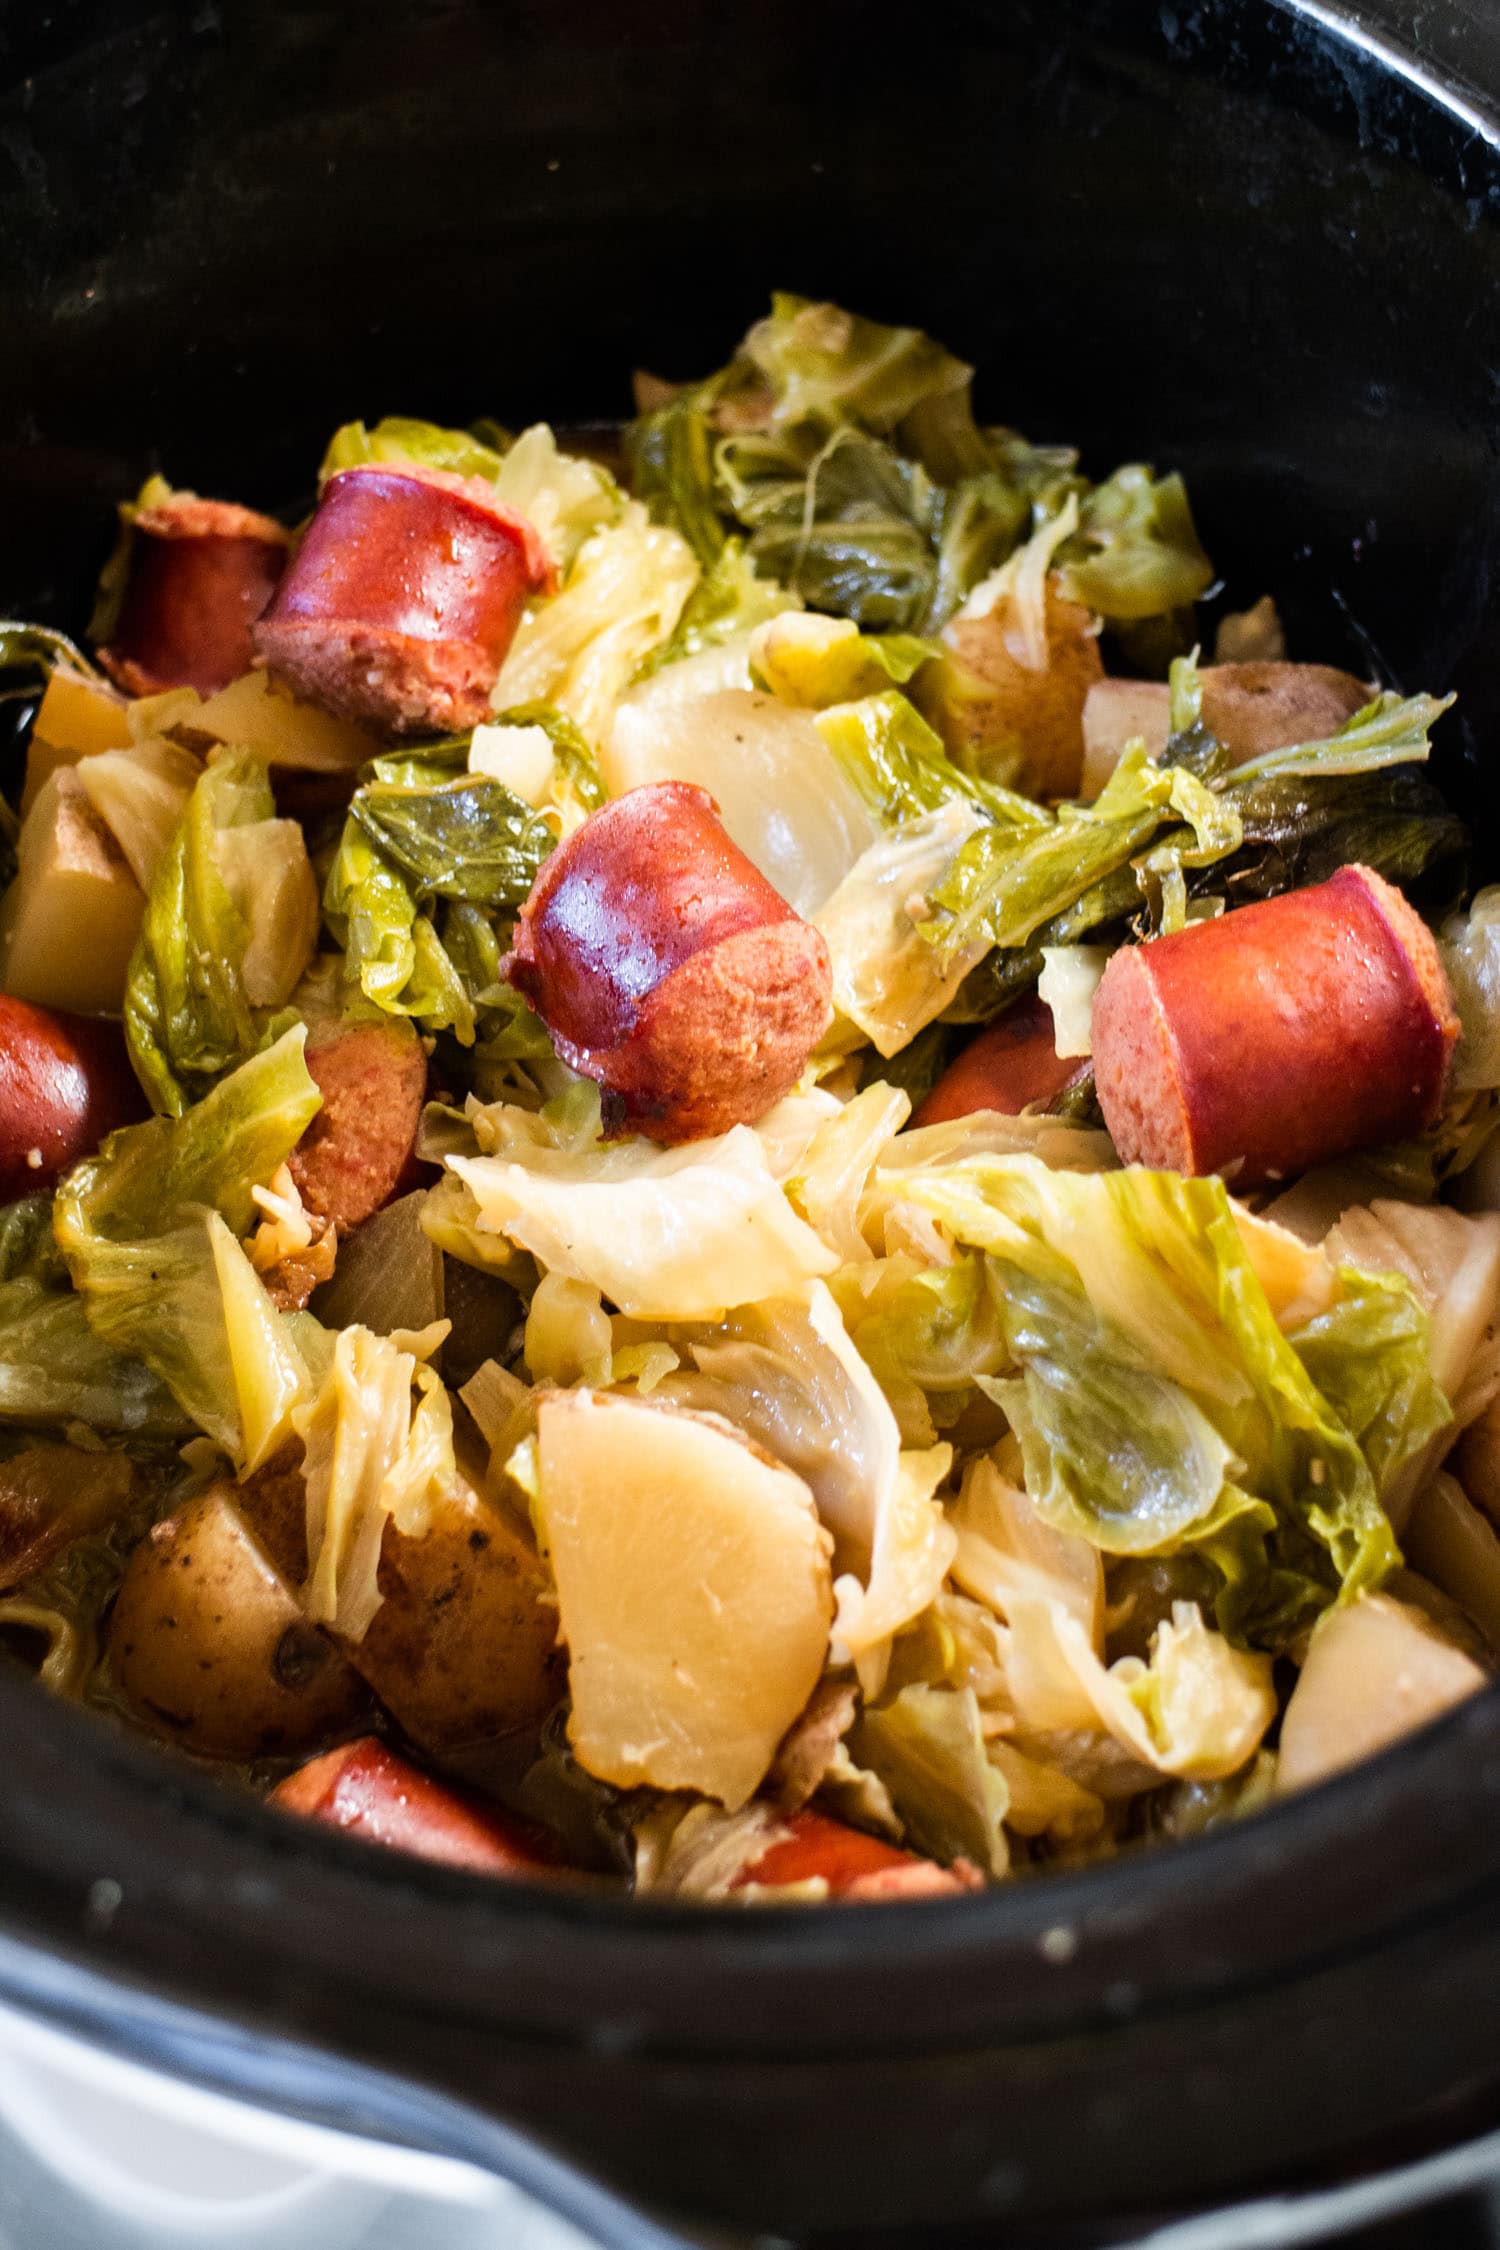 Slow Cooker Kielbasa and Cabbage Recipe - Easy Crockpot Meal!